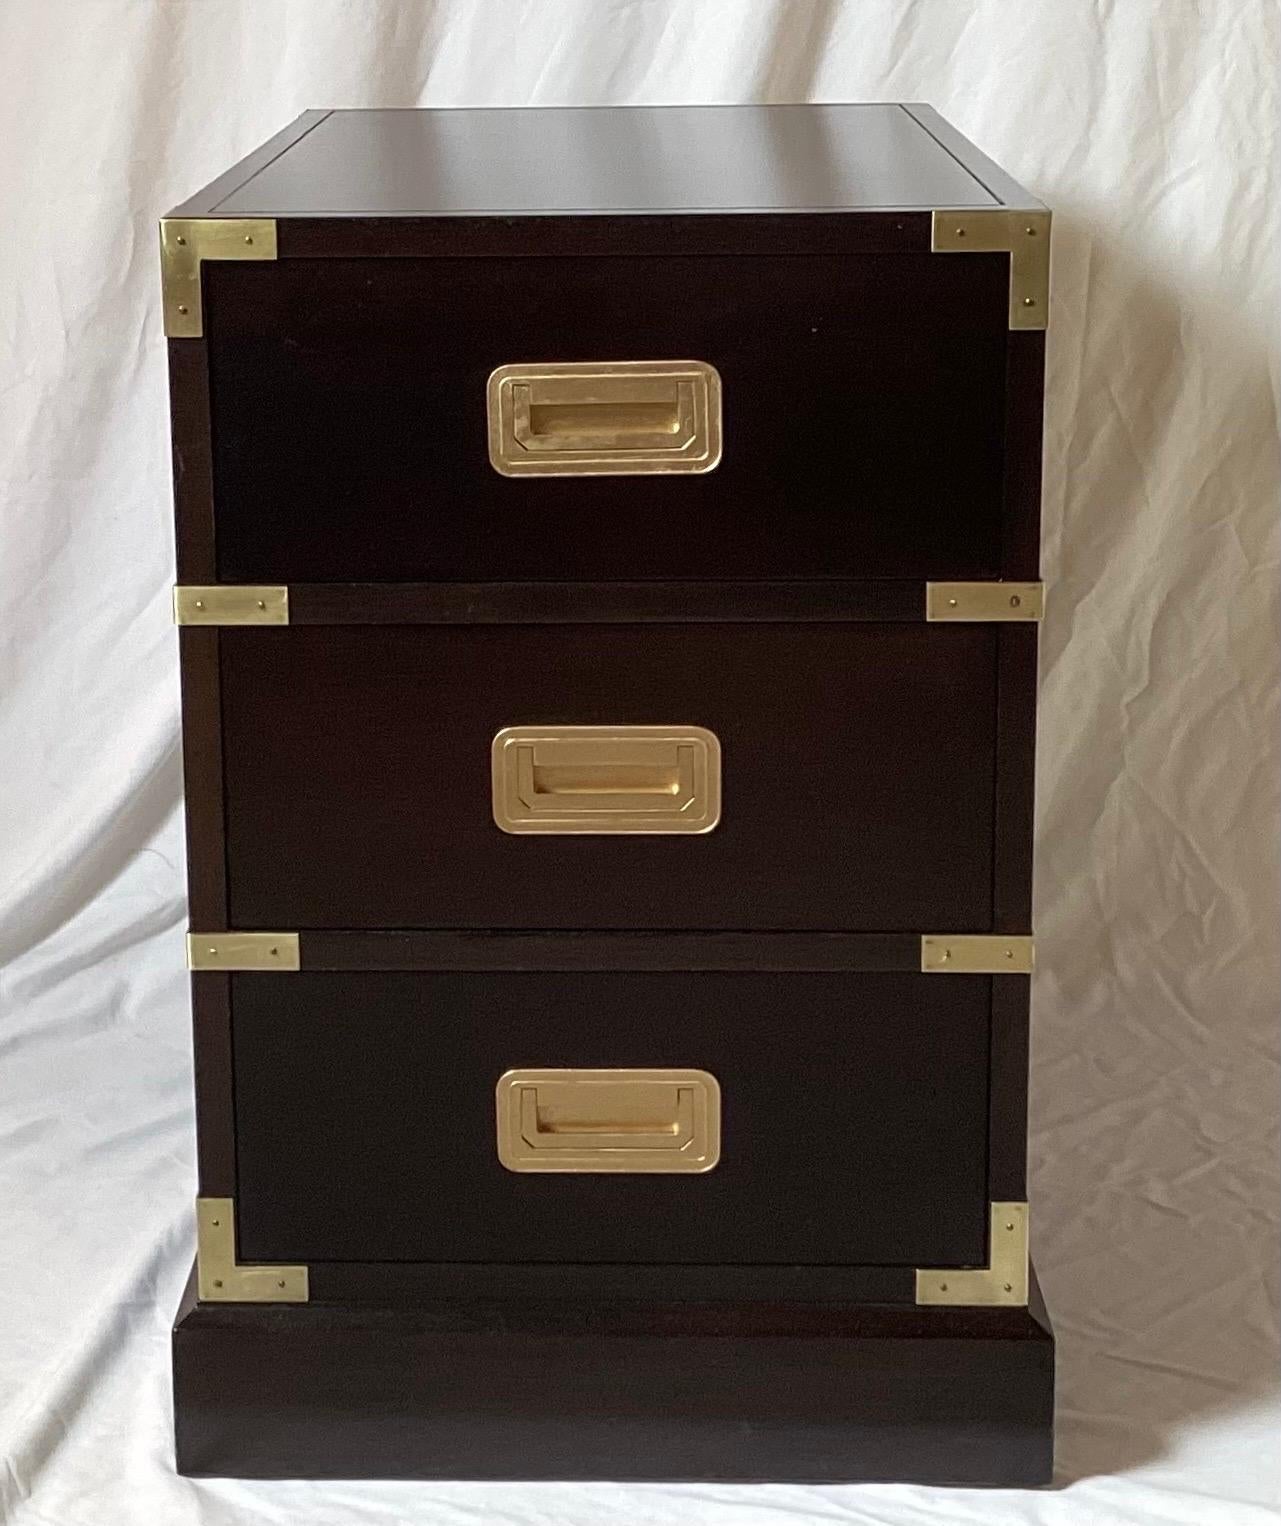 A Pair of chic dark walnut stained campaign style end tables or side chests by Baker Milling Road. The dark cabinets, with polished brass mounts and drawer pulls in a timeless campaign style. The chests with three working drawers with brass corners